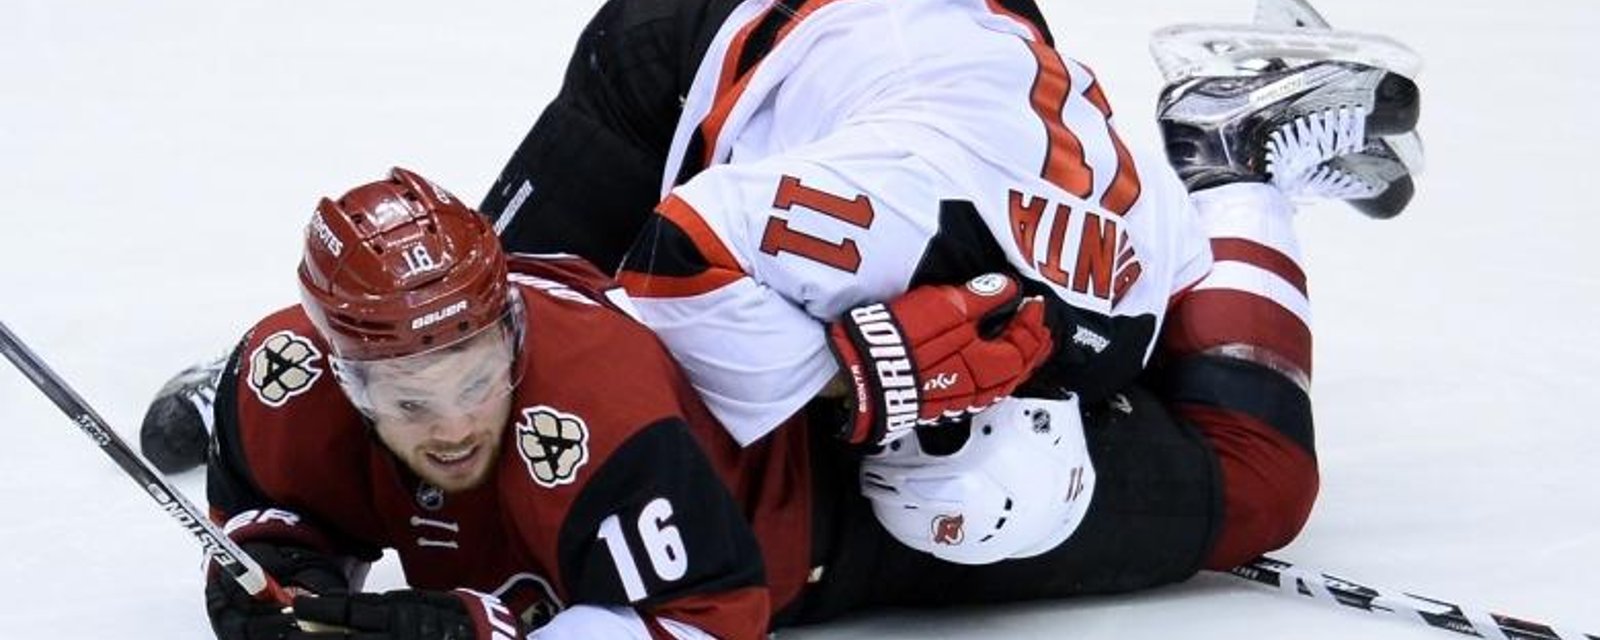 The NHL disciplines Max Domi after attacking player from behind.